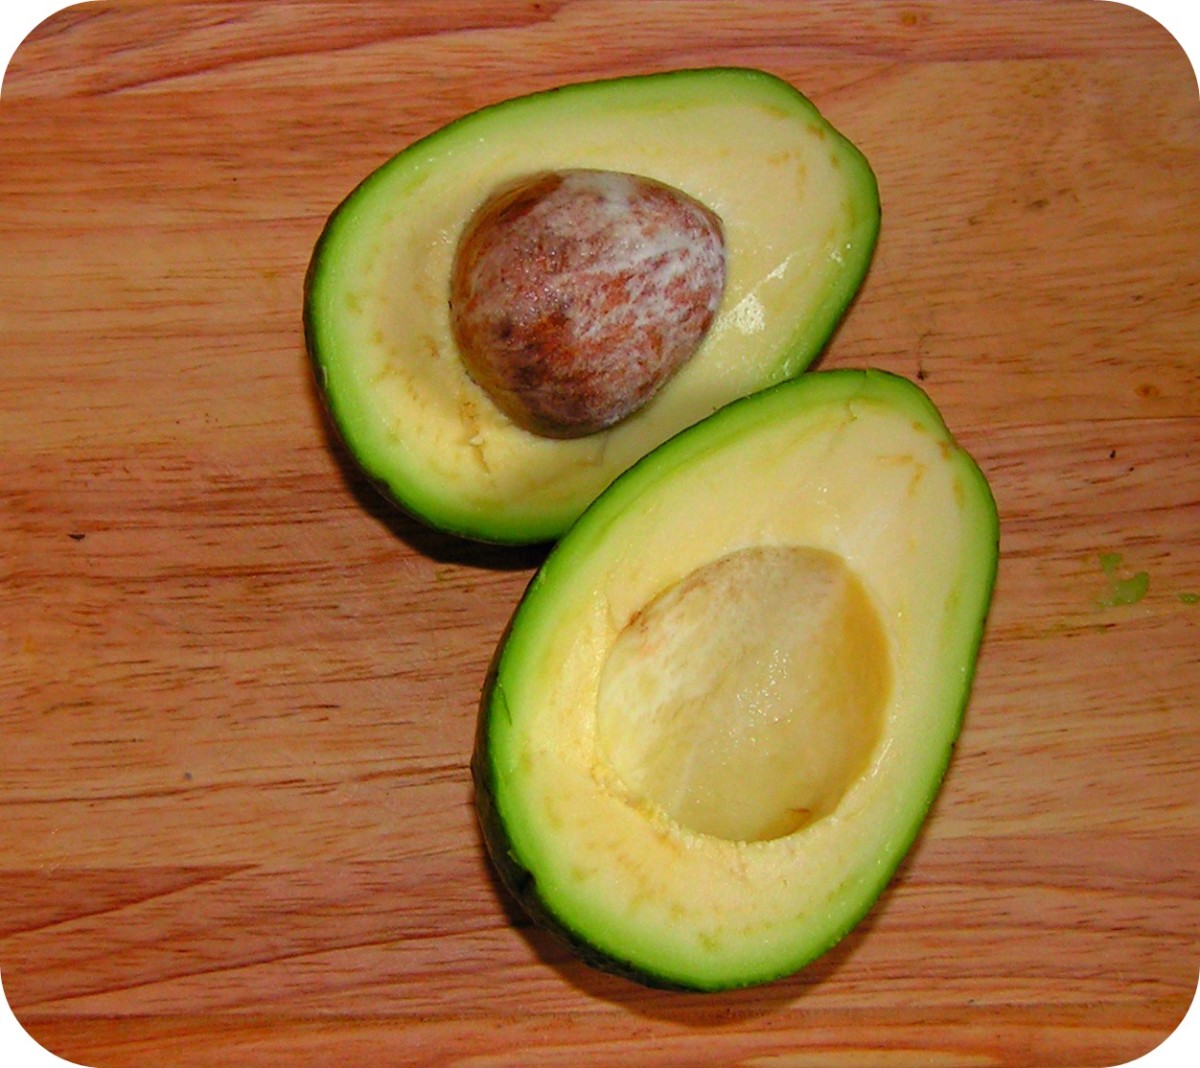 Avocados are a revered antiaging food, great for skin!